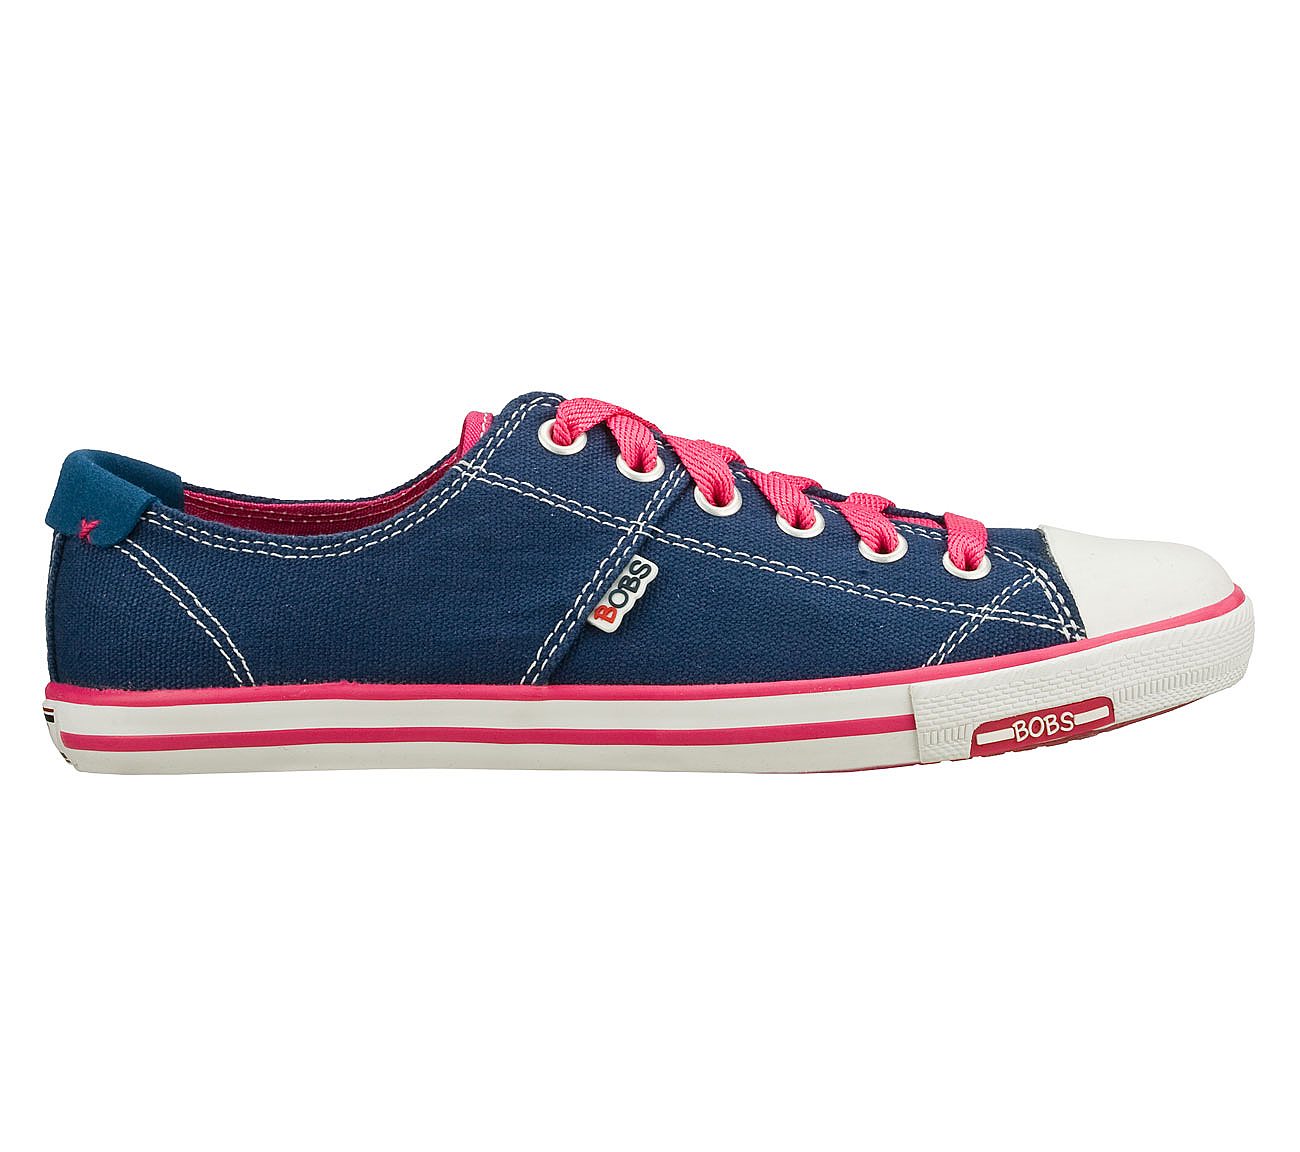 skechers shoes that look like converse 